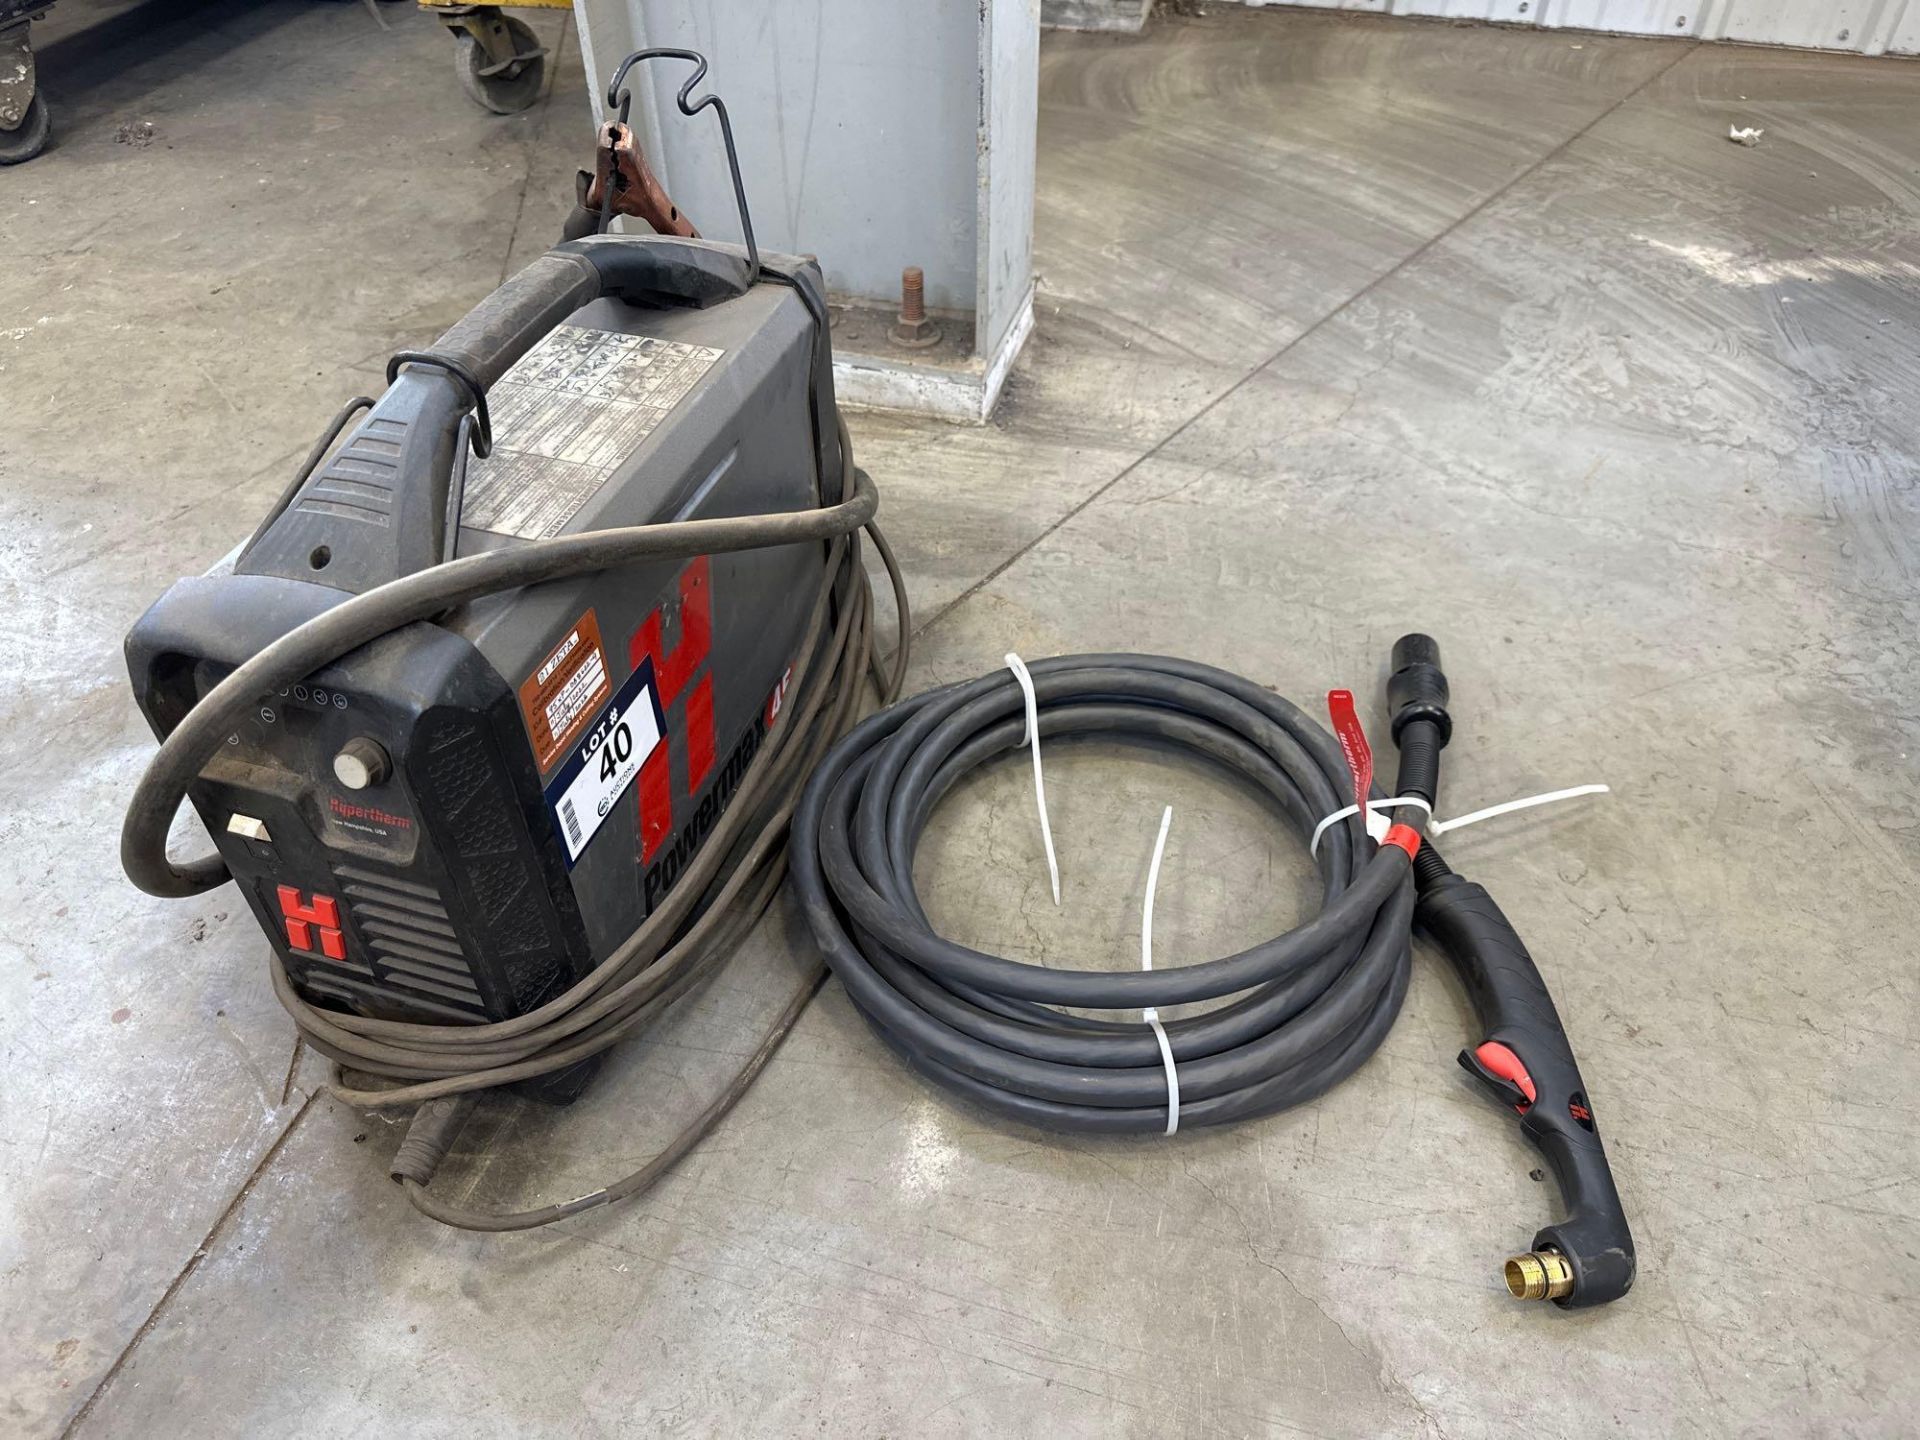 Hypertherm Powermax 45 Plasma Cutter w. extra cable